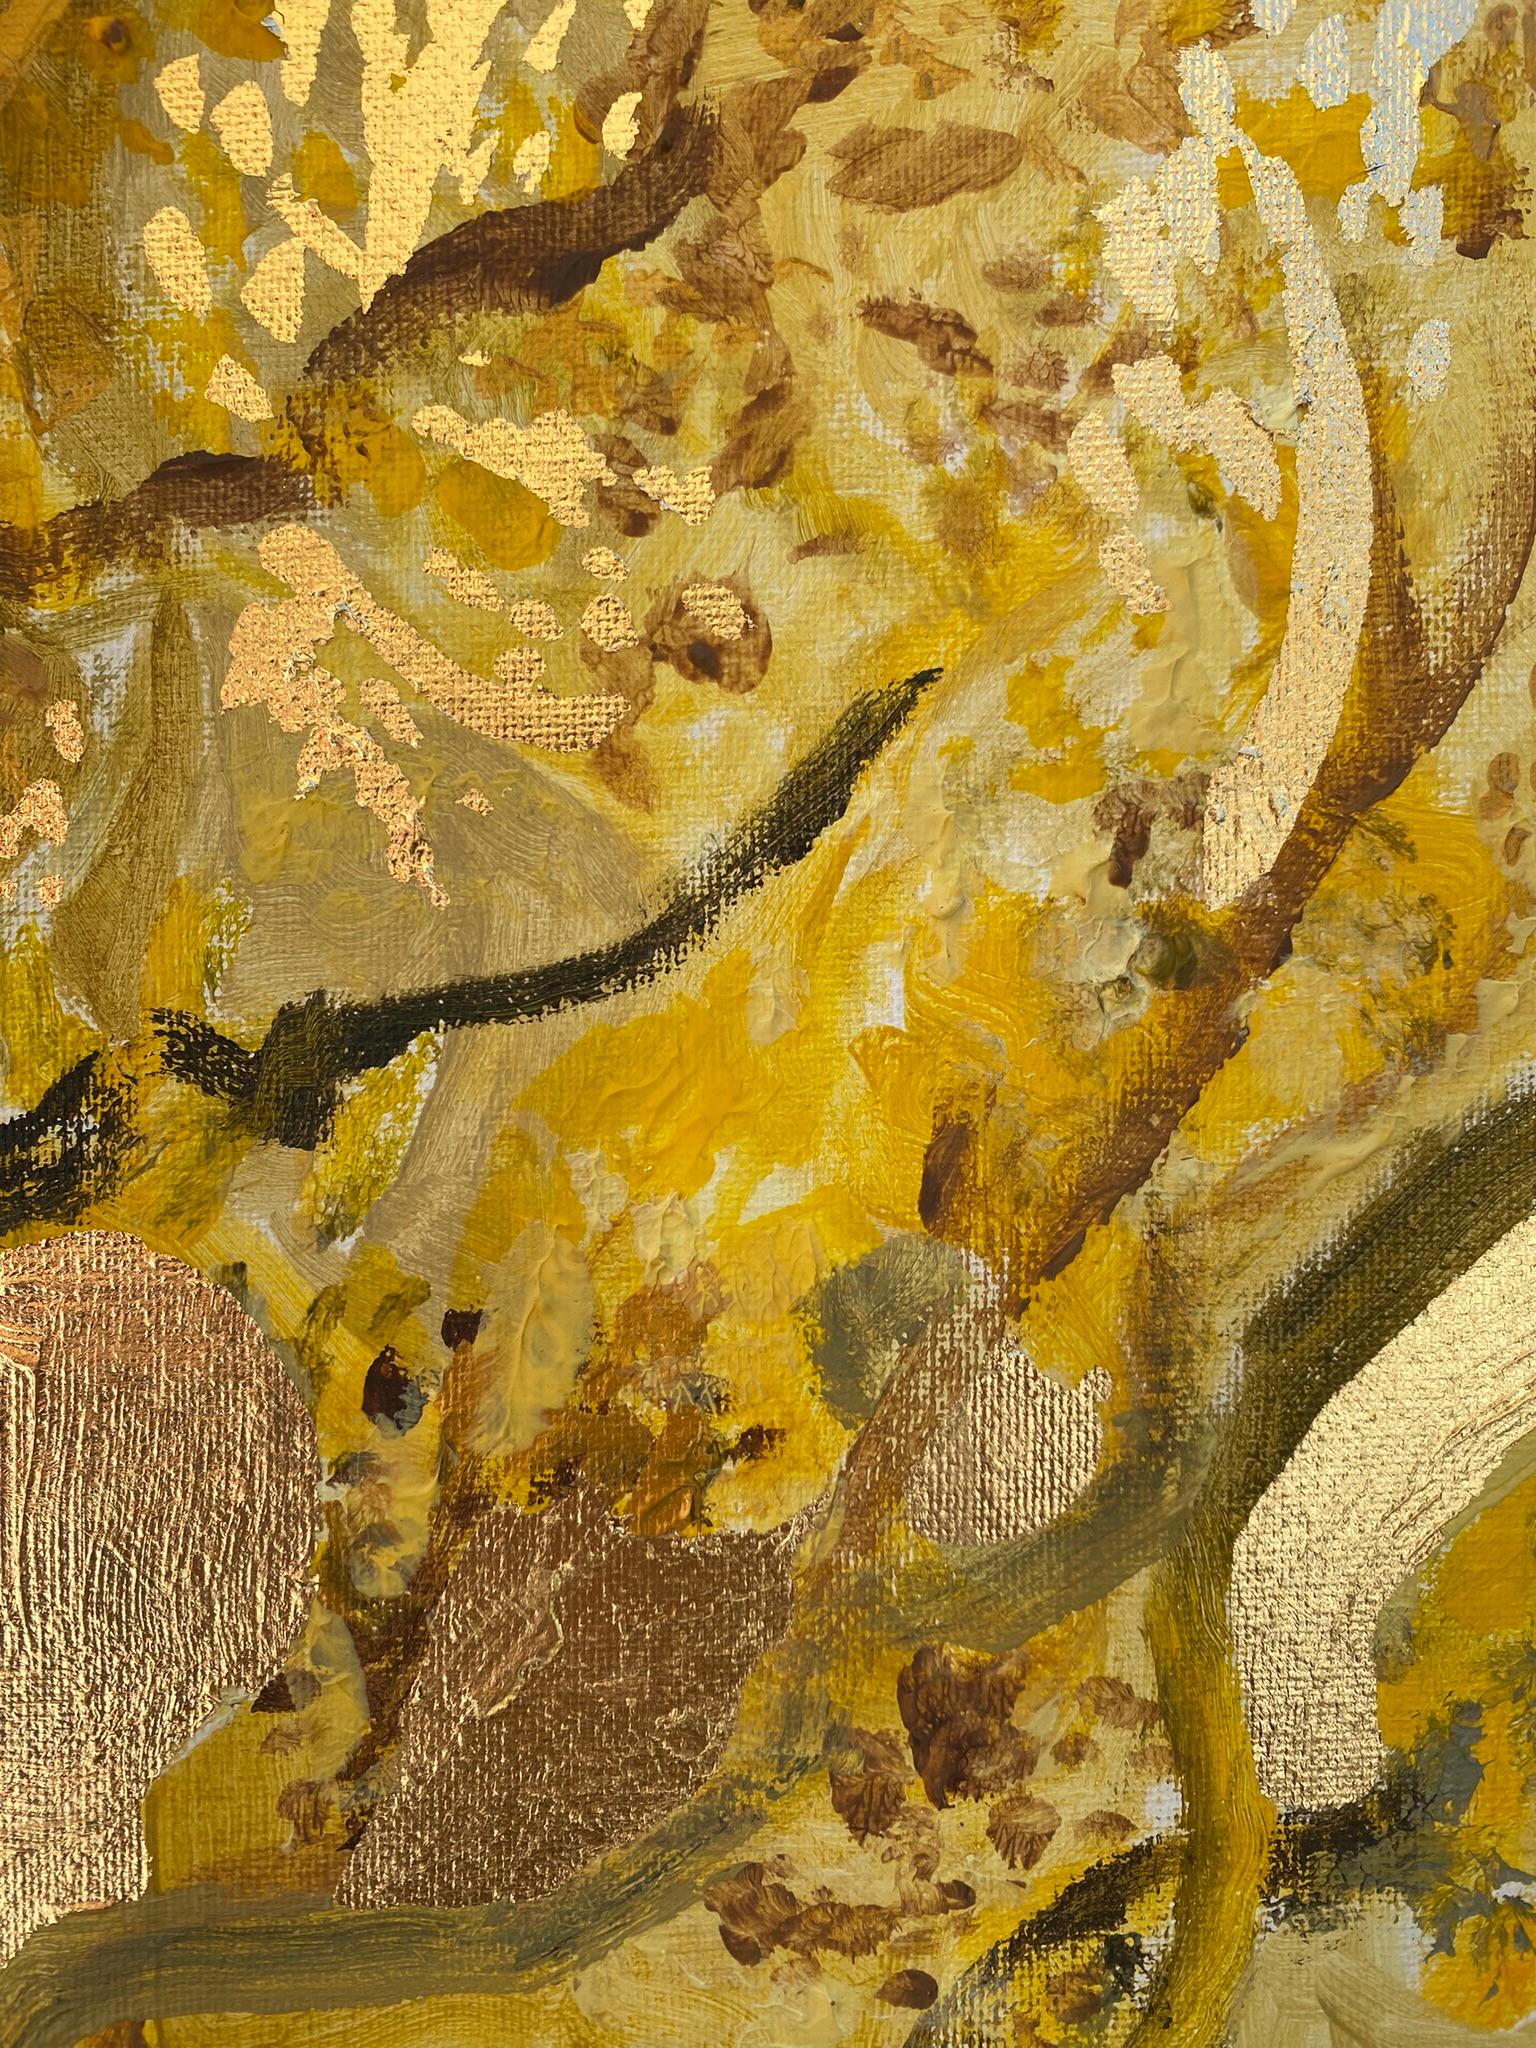 Original-Primary Yellow-Sunlit-Abstract-Expression-Gold Leaf-UK Awarded Artist 6